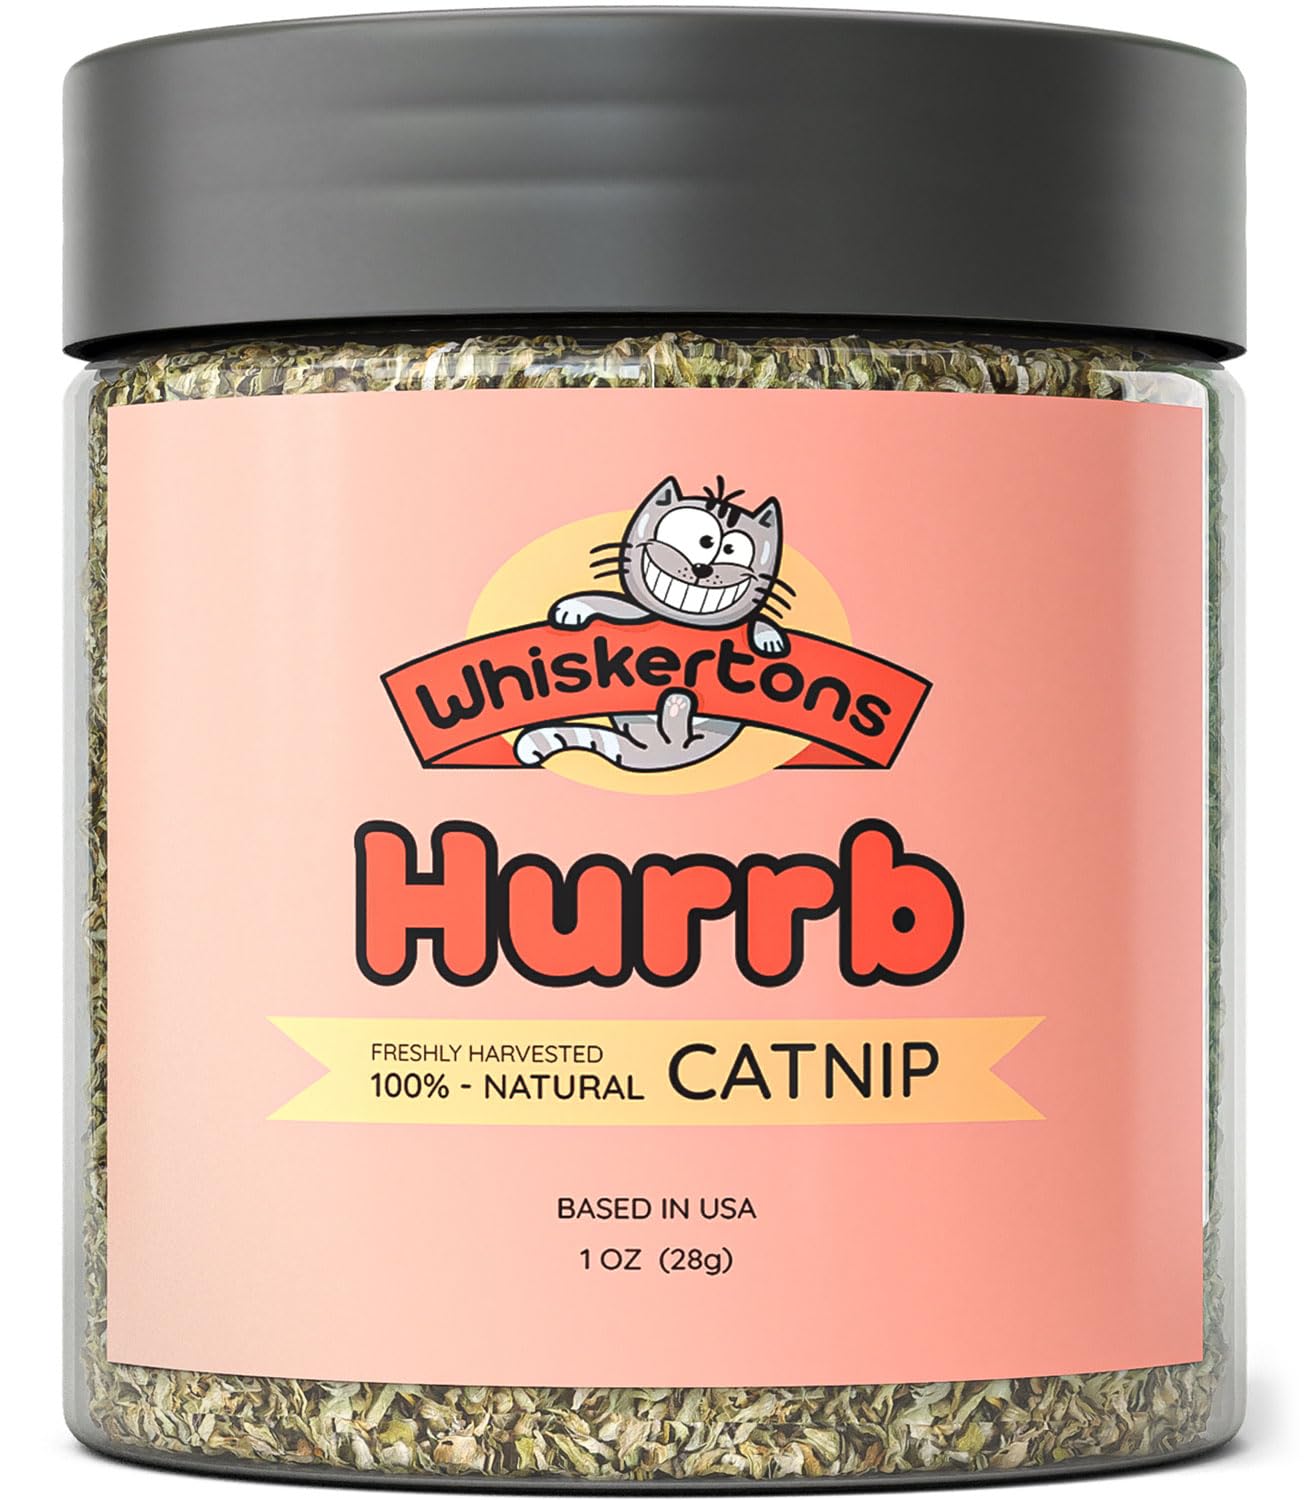 100% Natural Hurrb 1OZ Catnip For Cats & Kittens